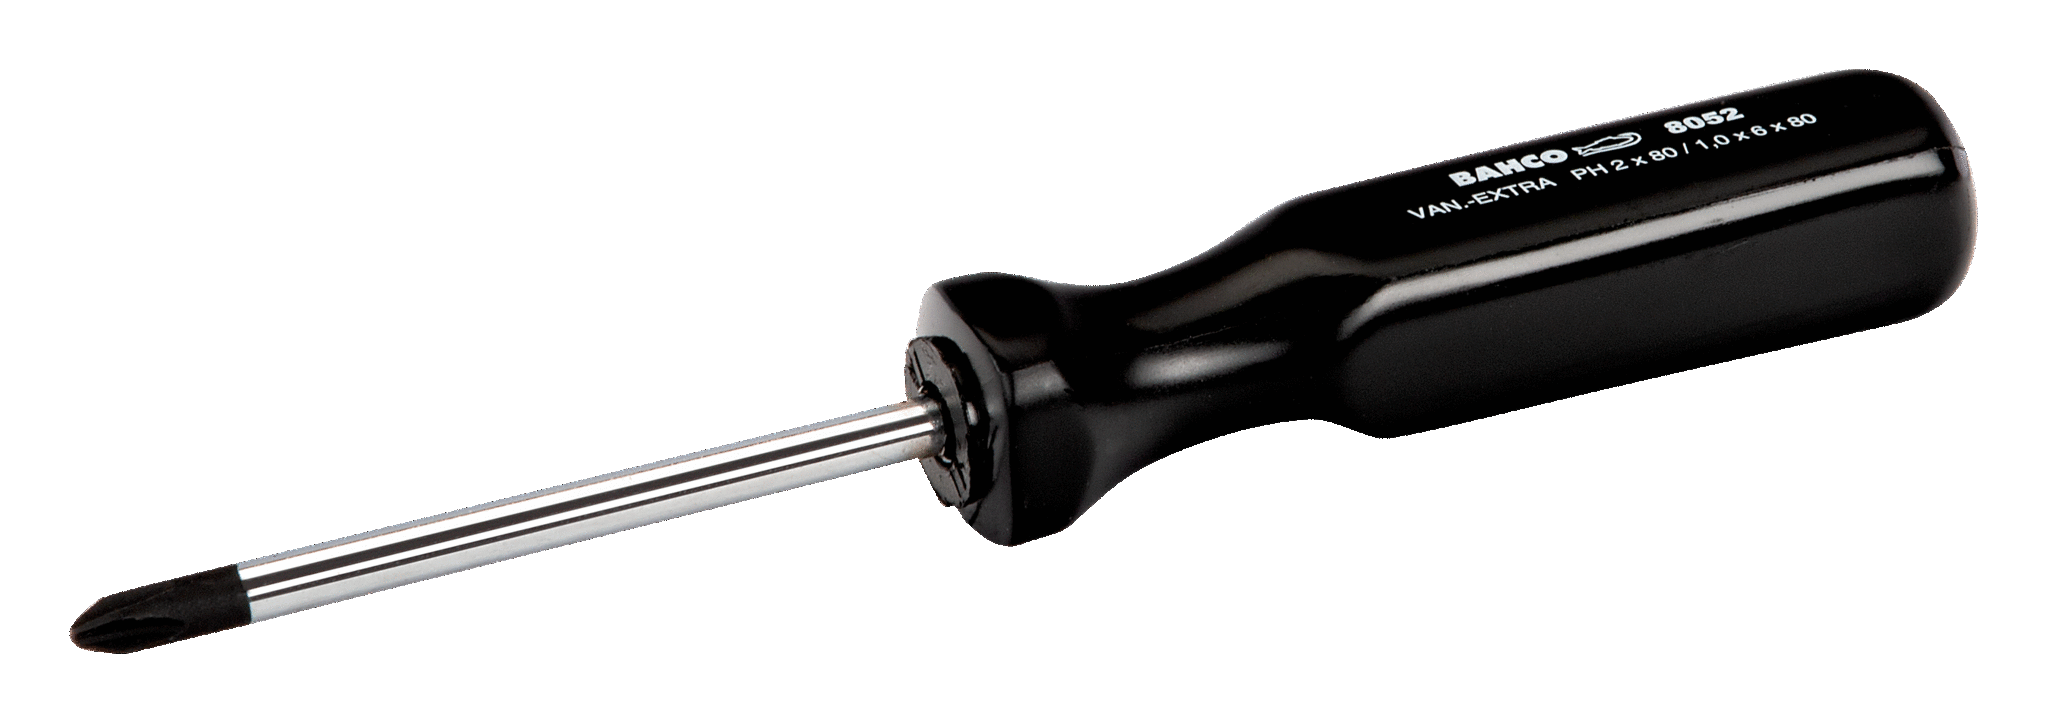 Bahco Phillips Screwdriver PH 2 Screwdriver developed in accordance with the be-8620 